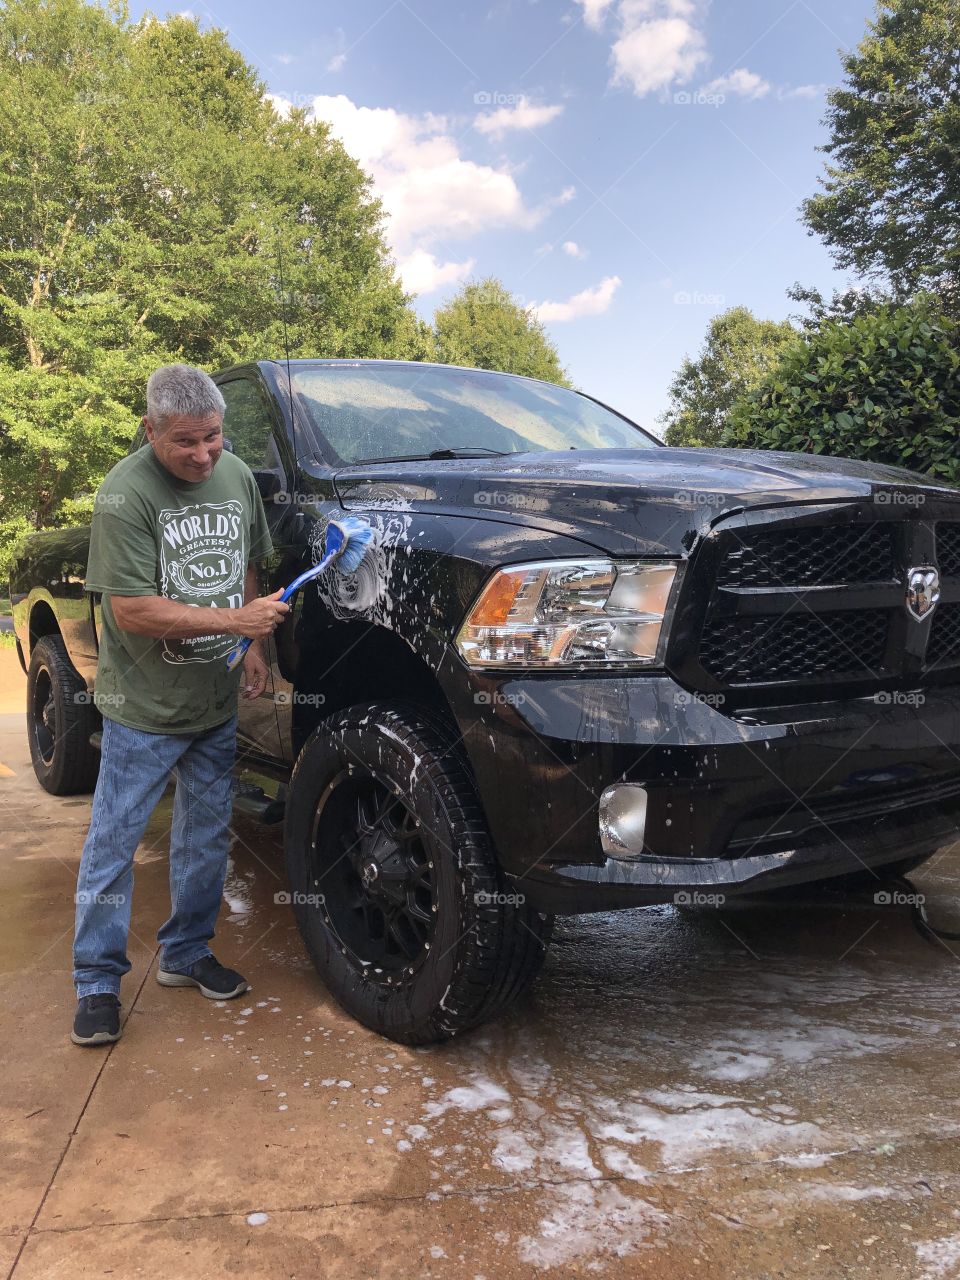 Worlds Best Dad on Father’s Day shot today June 16th 2019 washing his pride and joy aka The Beast.  My mom gave this to him a couple of years ago for their anniversary. I have the best parents!  Happy Father’s Day out there to all dads.